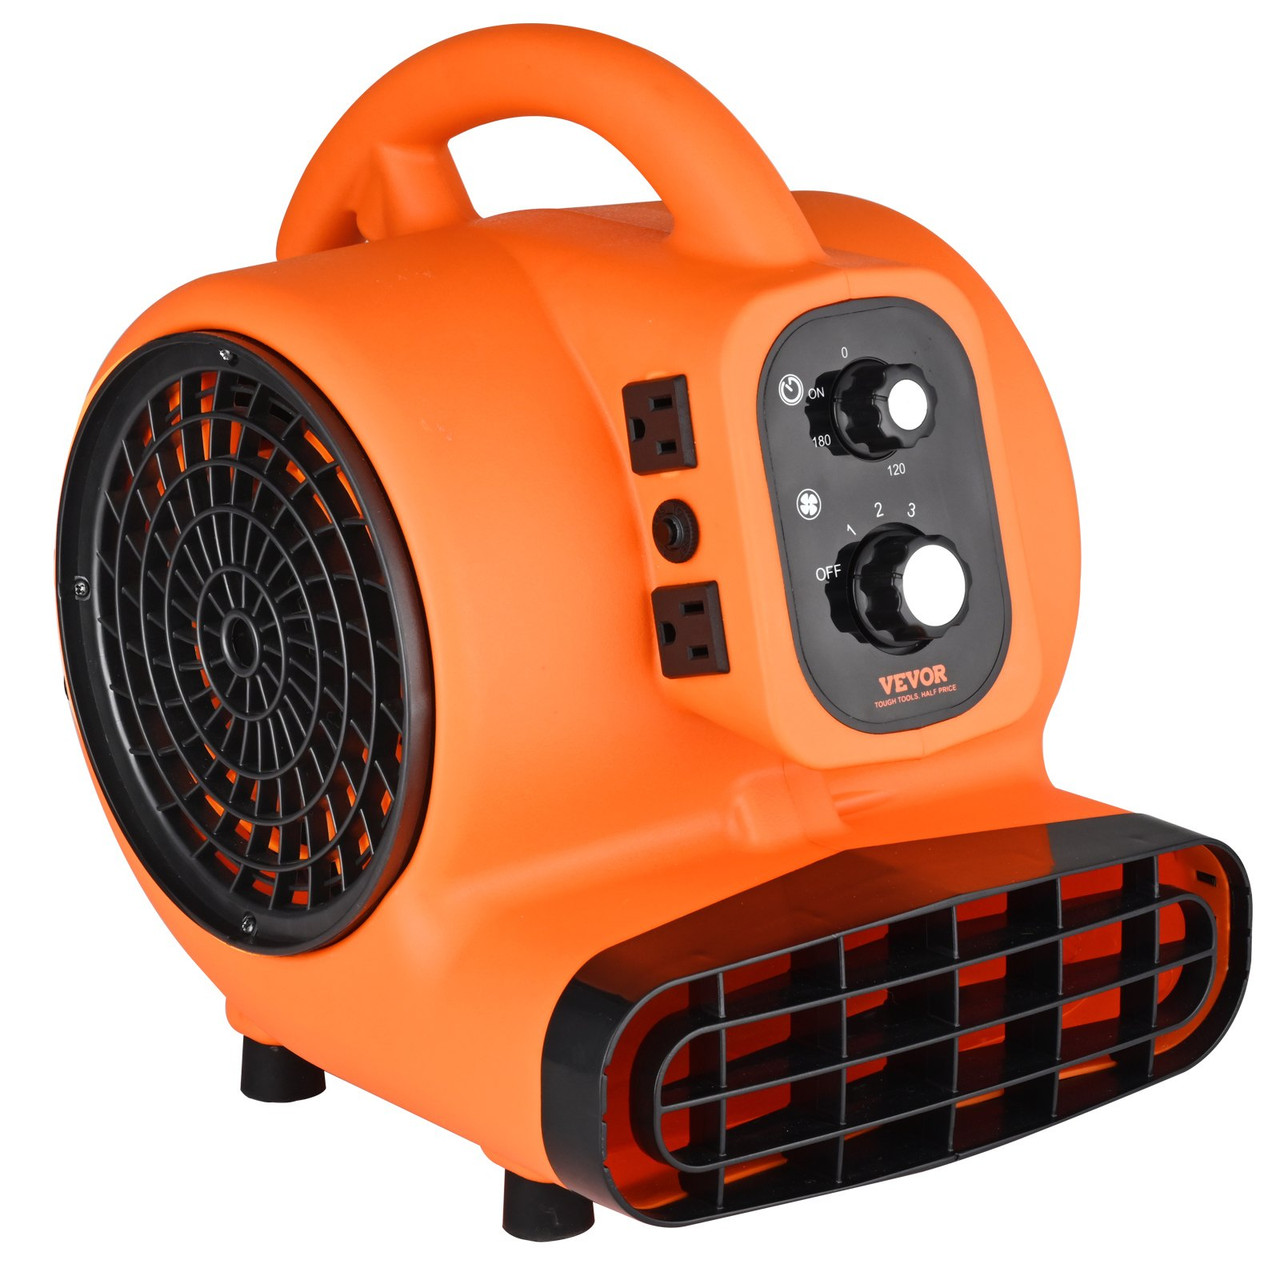 Floor Blower, 1/4 HP, 1000 CFM Air Mover for Drying and Cooling, Portable Carpet Dryer Fan with 4 Blowing Angles and Time Function, for Janitorial, Home, Commercial, Industrail Use, ETL Listed